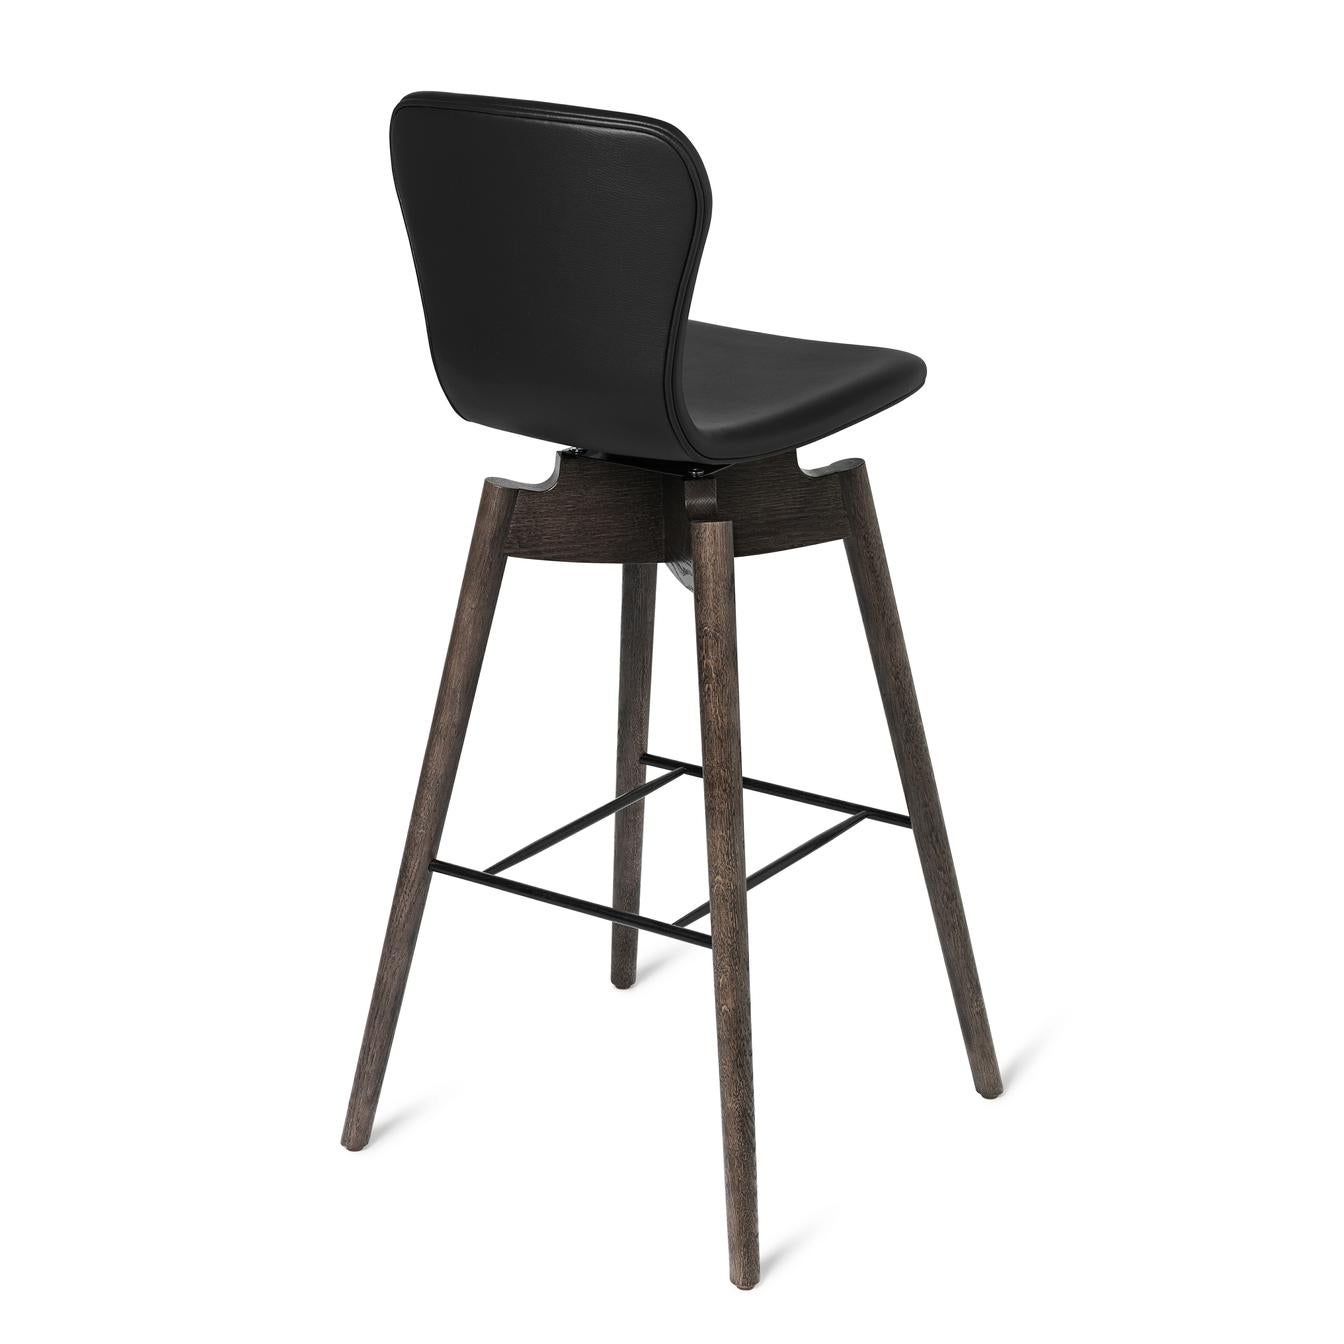 The silhouette of the Shell bar stool is elegant and features long lines in solid oak wood and a soft leather backrest swivel-seat in rich and genuine tones and with clean hand tailored stitches.
Together with the most recognised leather supplier